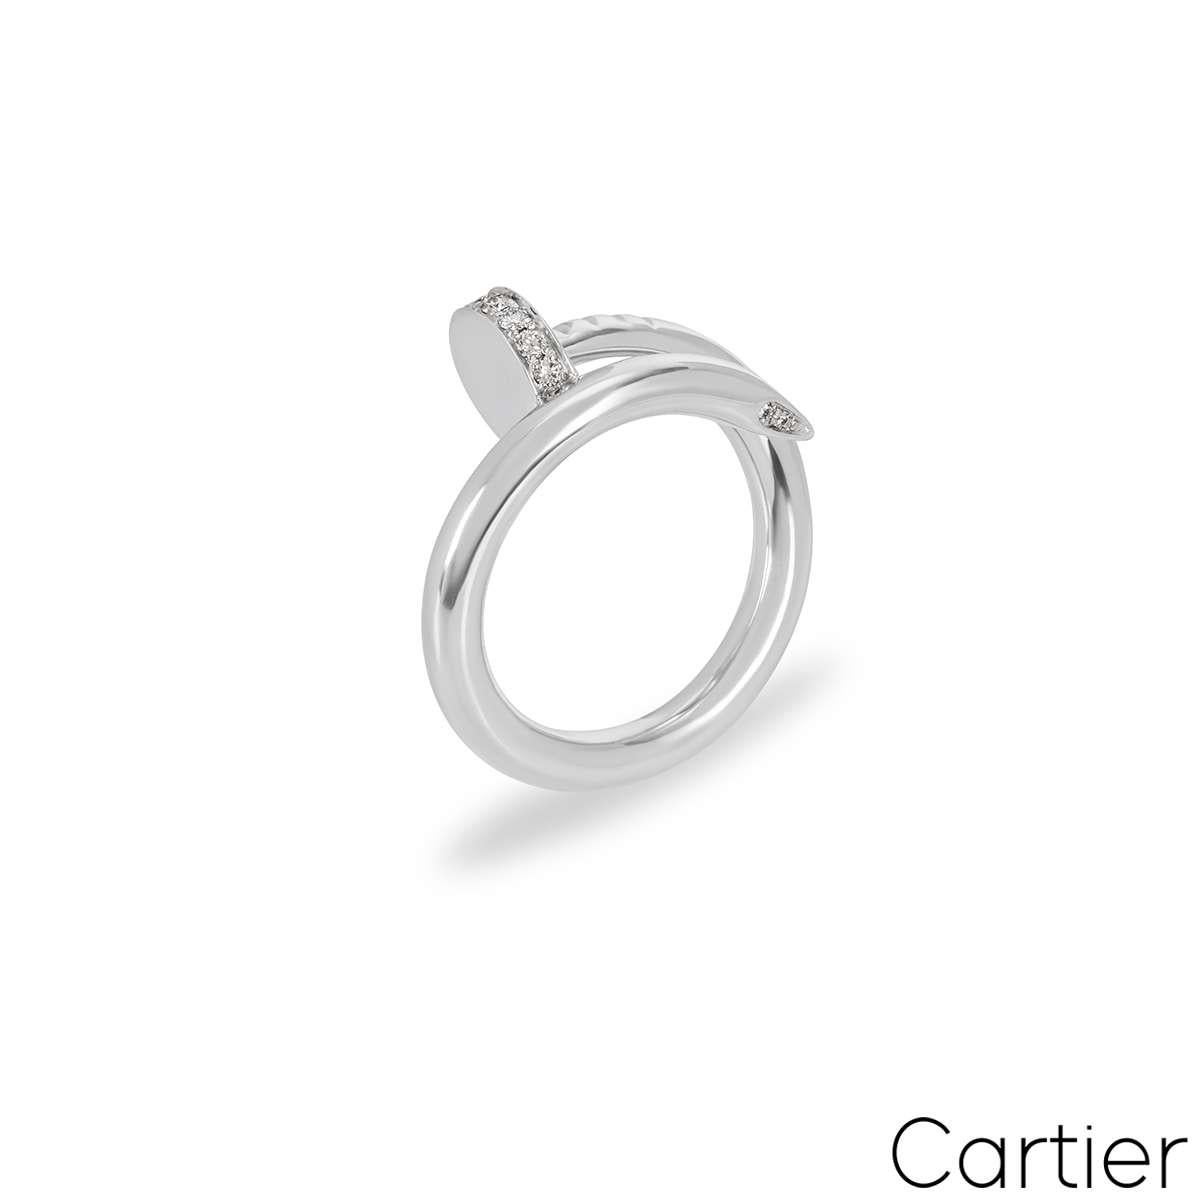 An 18k white gold diamond ring by Cartier from the Juste un Clou collection. The ring is in the style of a nail and has 22 round brilliant cut diamonds set in the head and tip with a total weight of 0.13ct. A size UK P - EU 56 and the ring has a